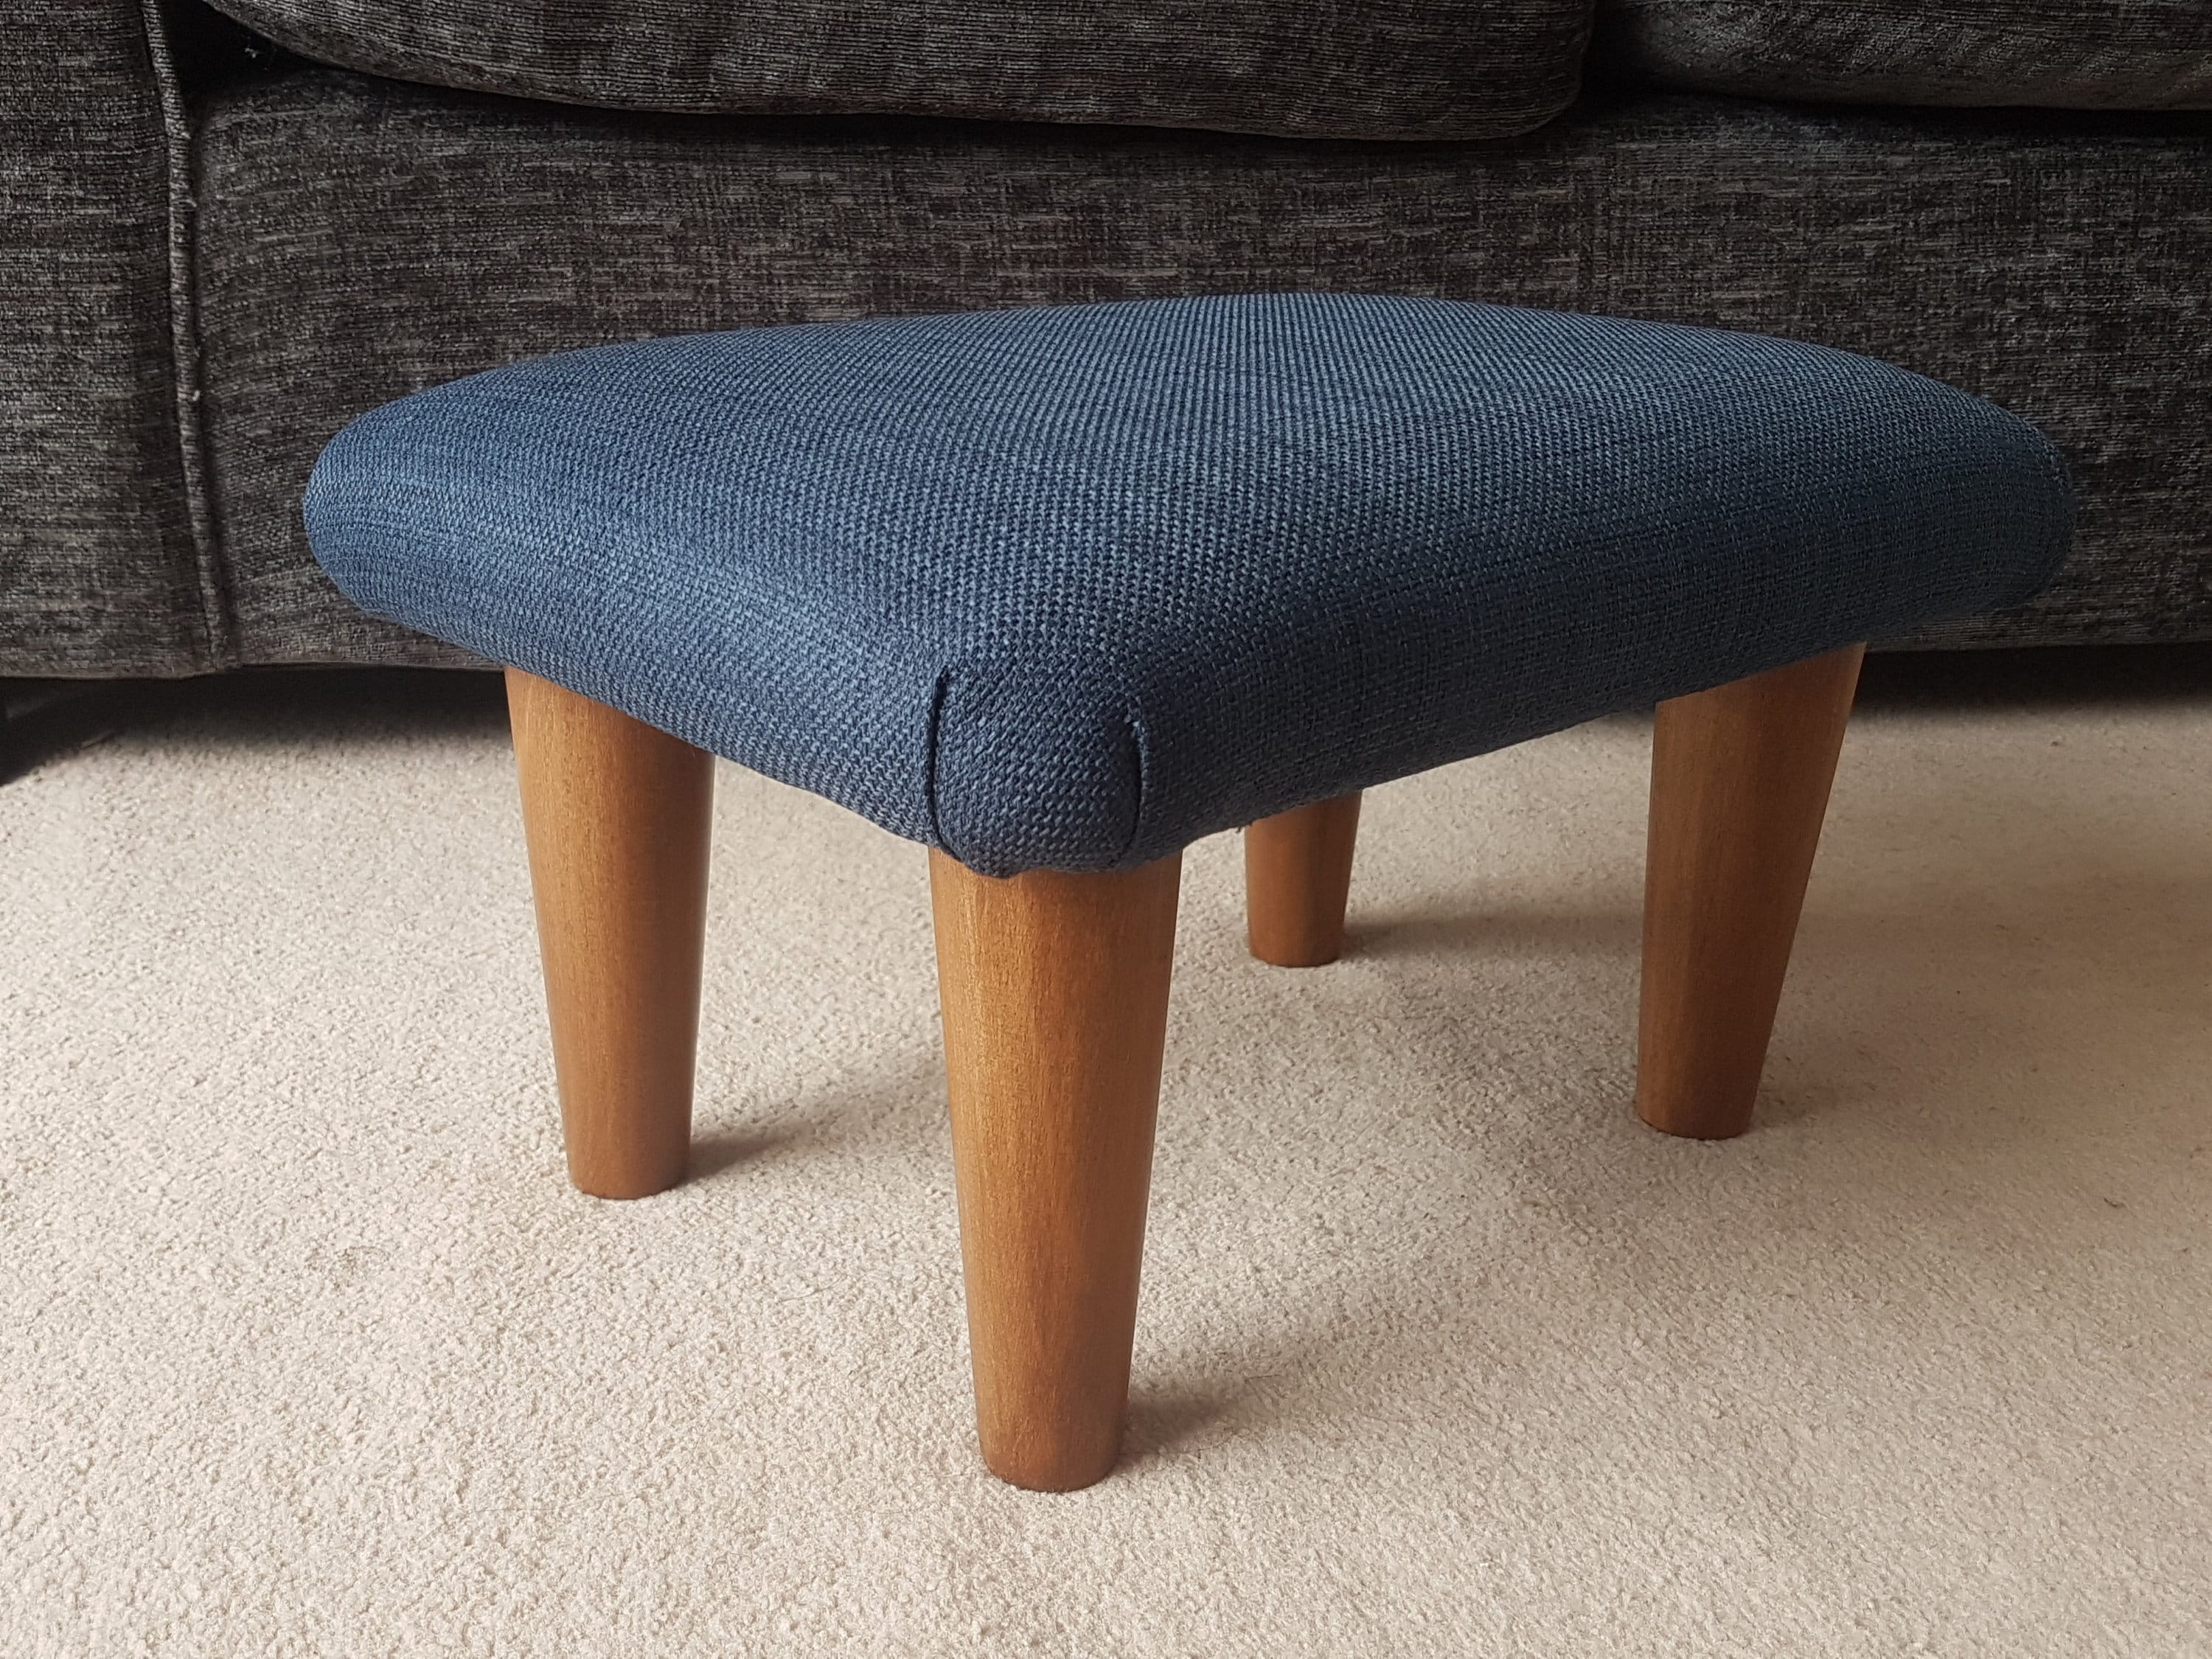 Chocolate Brown 10-26 Cm Small Footstool With BUTTON and Wooden or Plastic  Feet / Upholstered Handmade Footrest Bed Step Stool Buttoned 